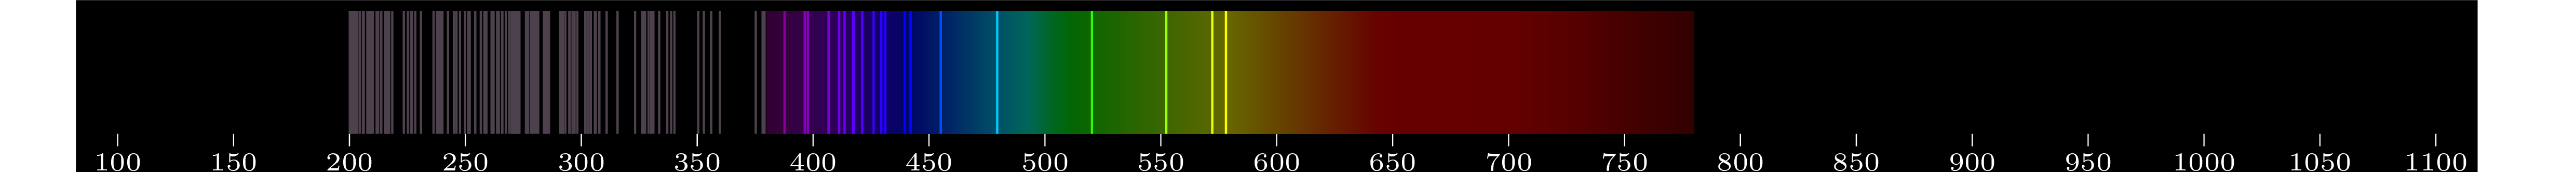 emmision spectra of element Os